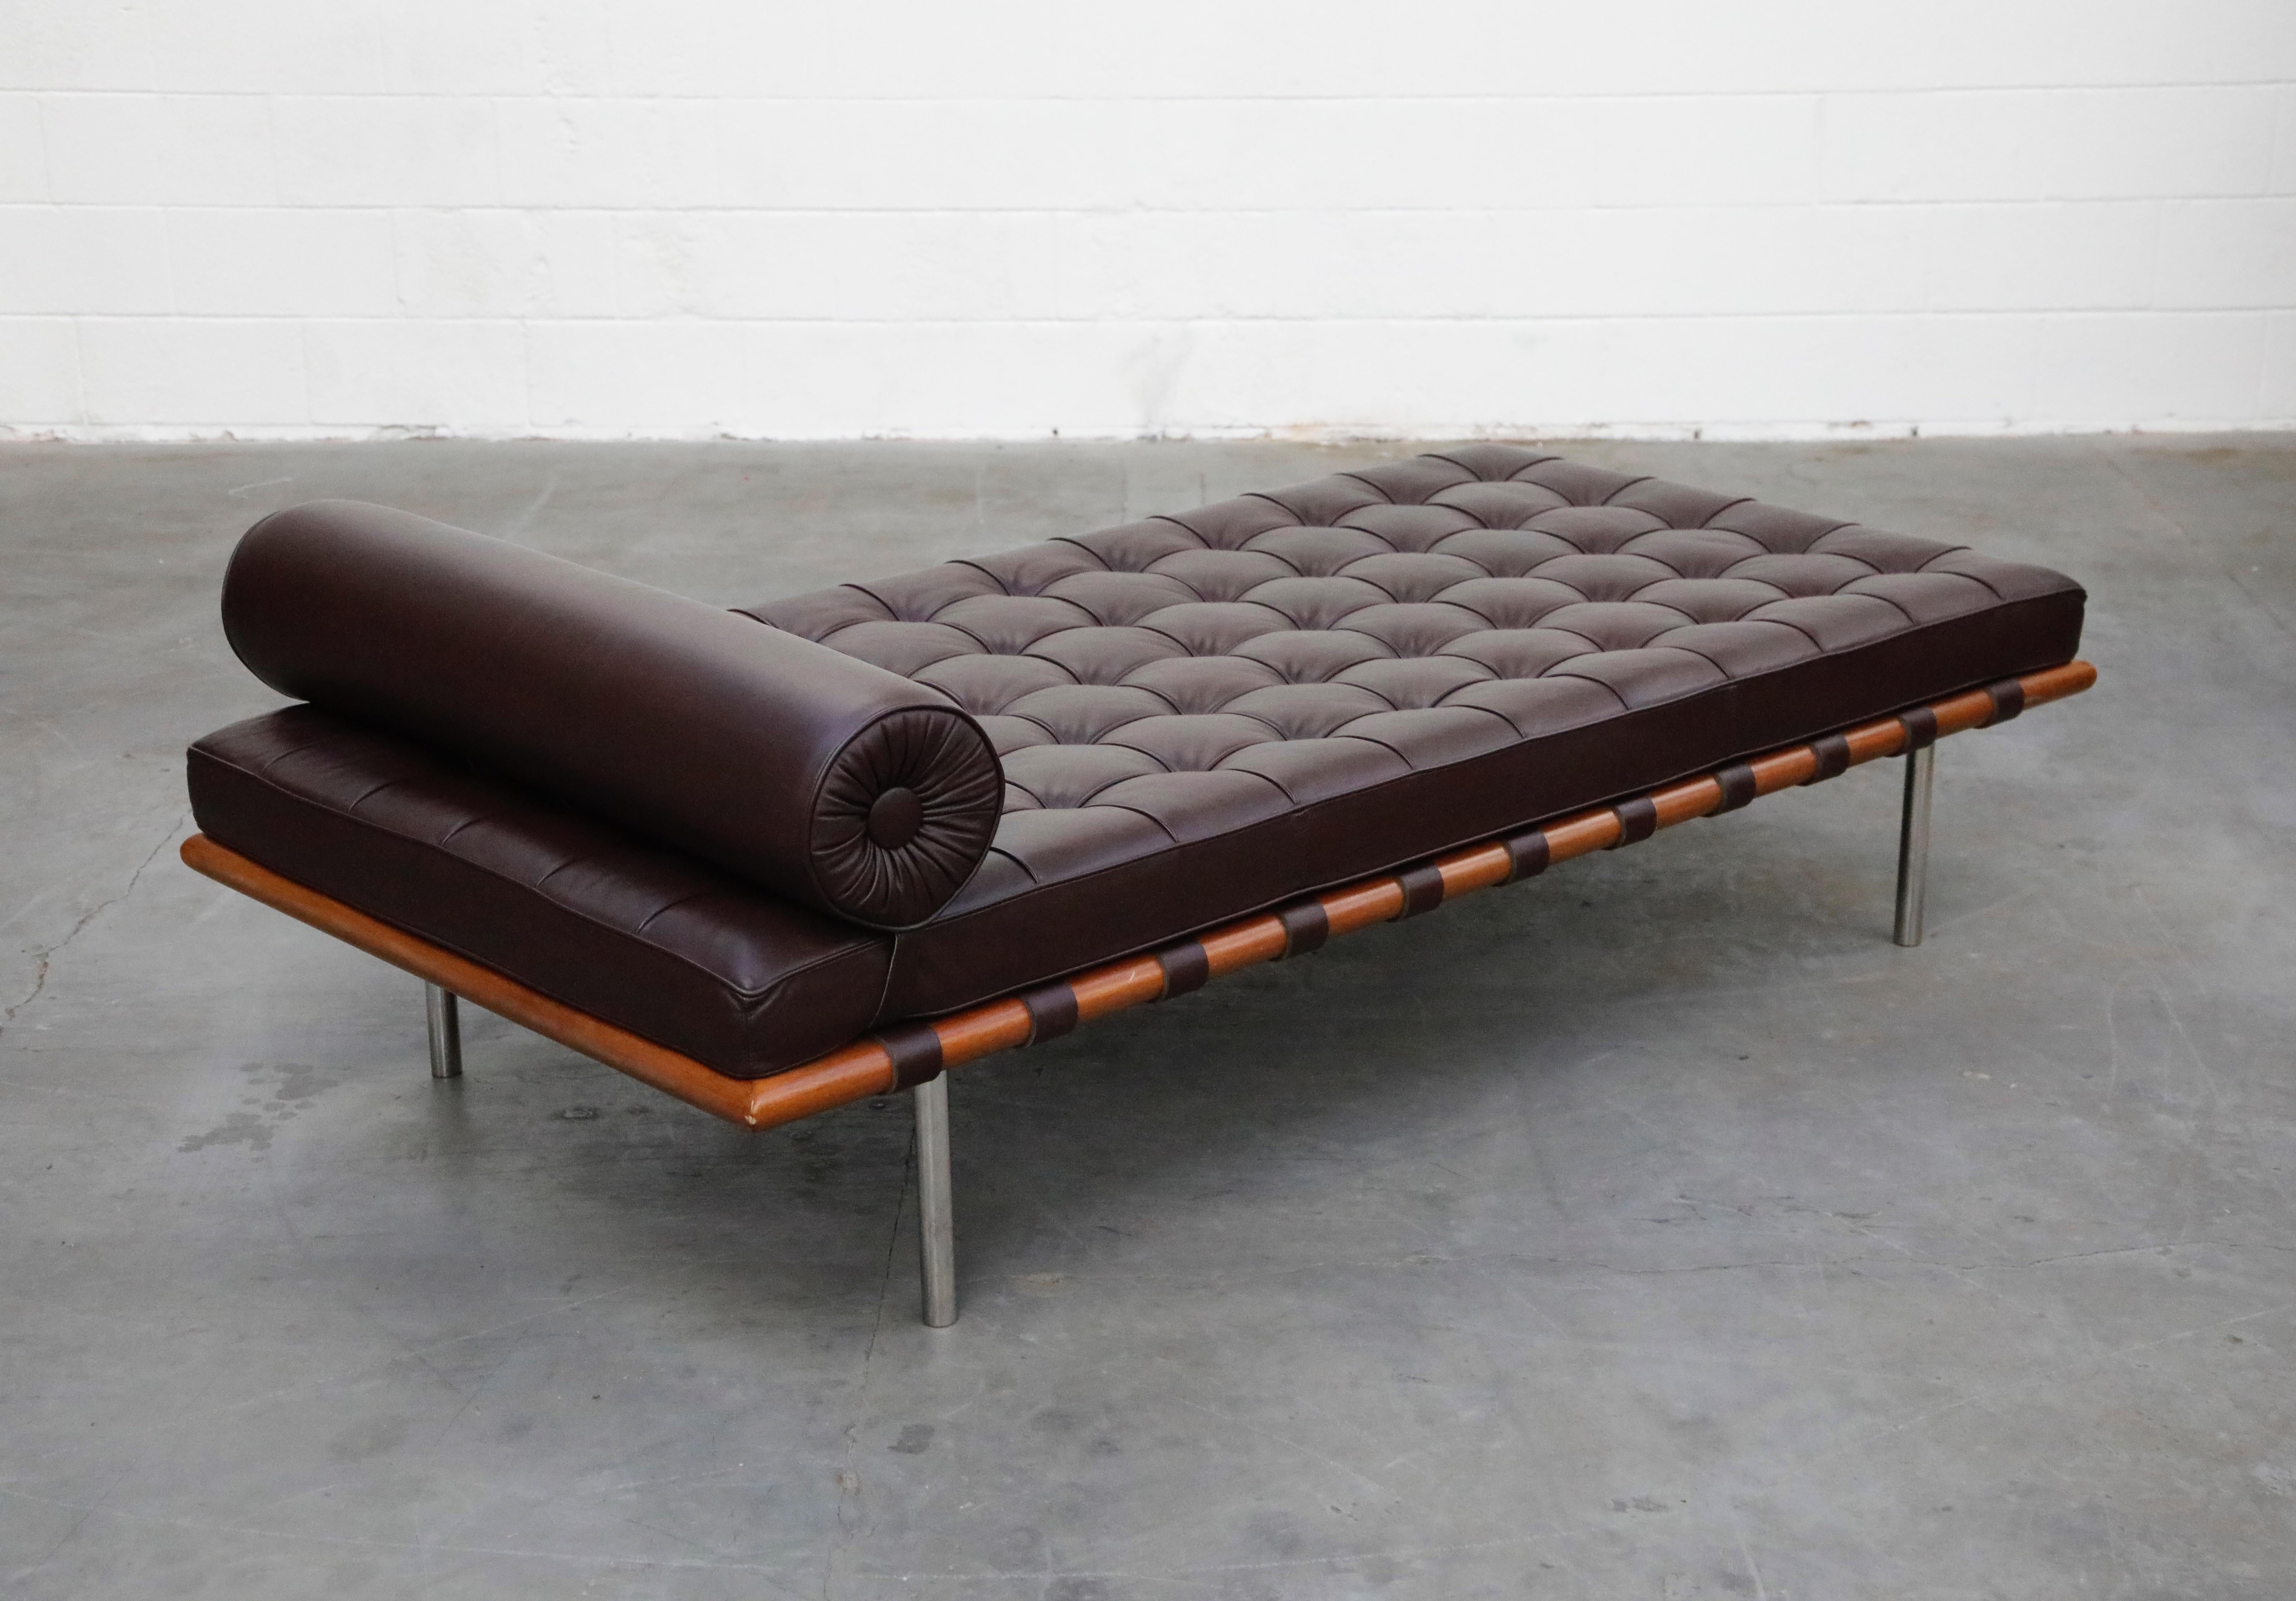 This fantastic Barcelona Daybed by Mies Van Der Rohe for Knoll is in a breathtaking deep brown high quality bovine leather. Thick and a substantial hand feel with incredible texture, as you would expect from a luxury maker such is Knoll. This